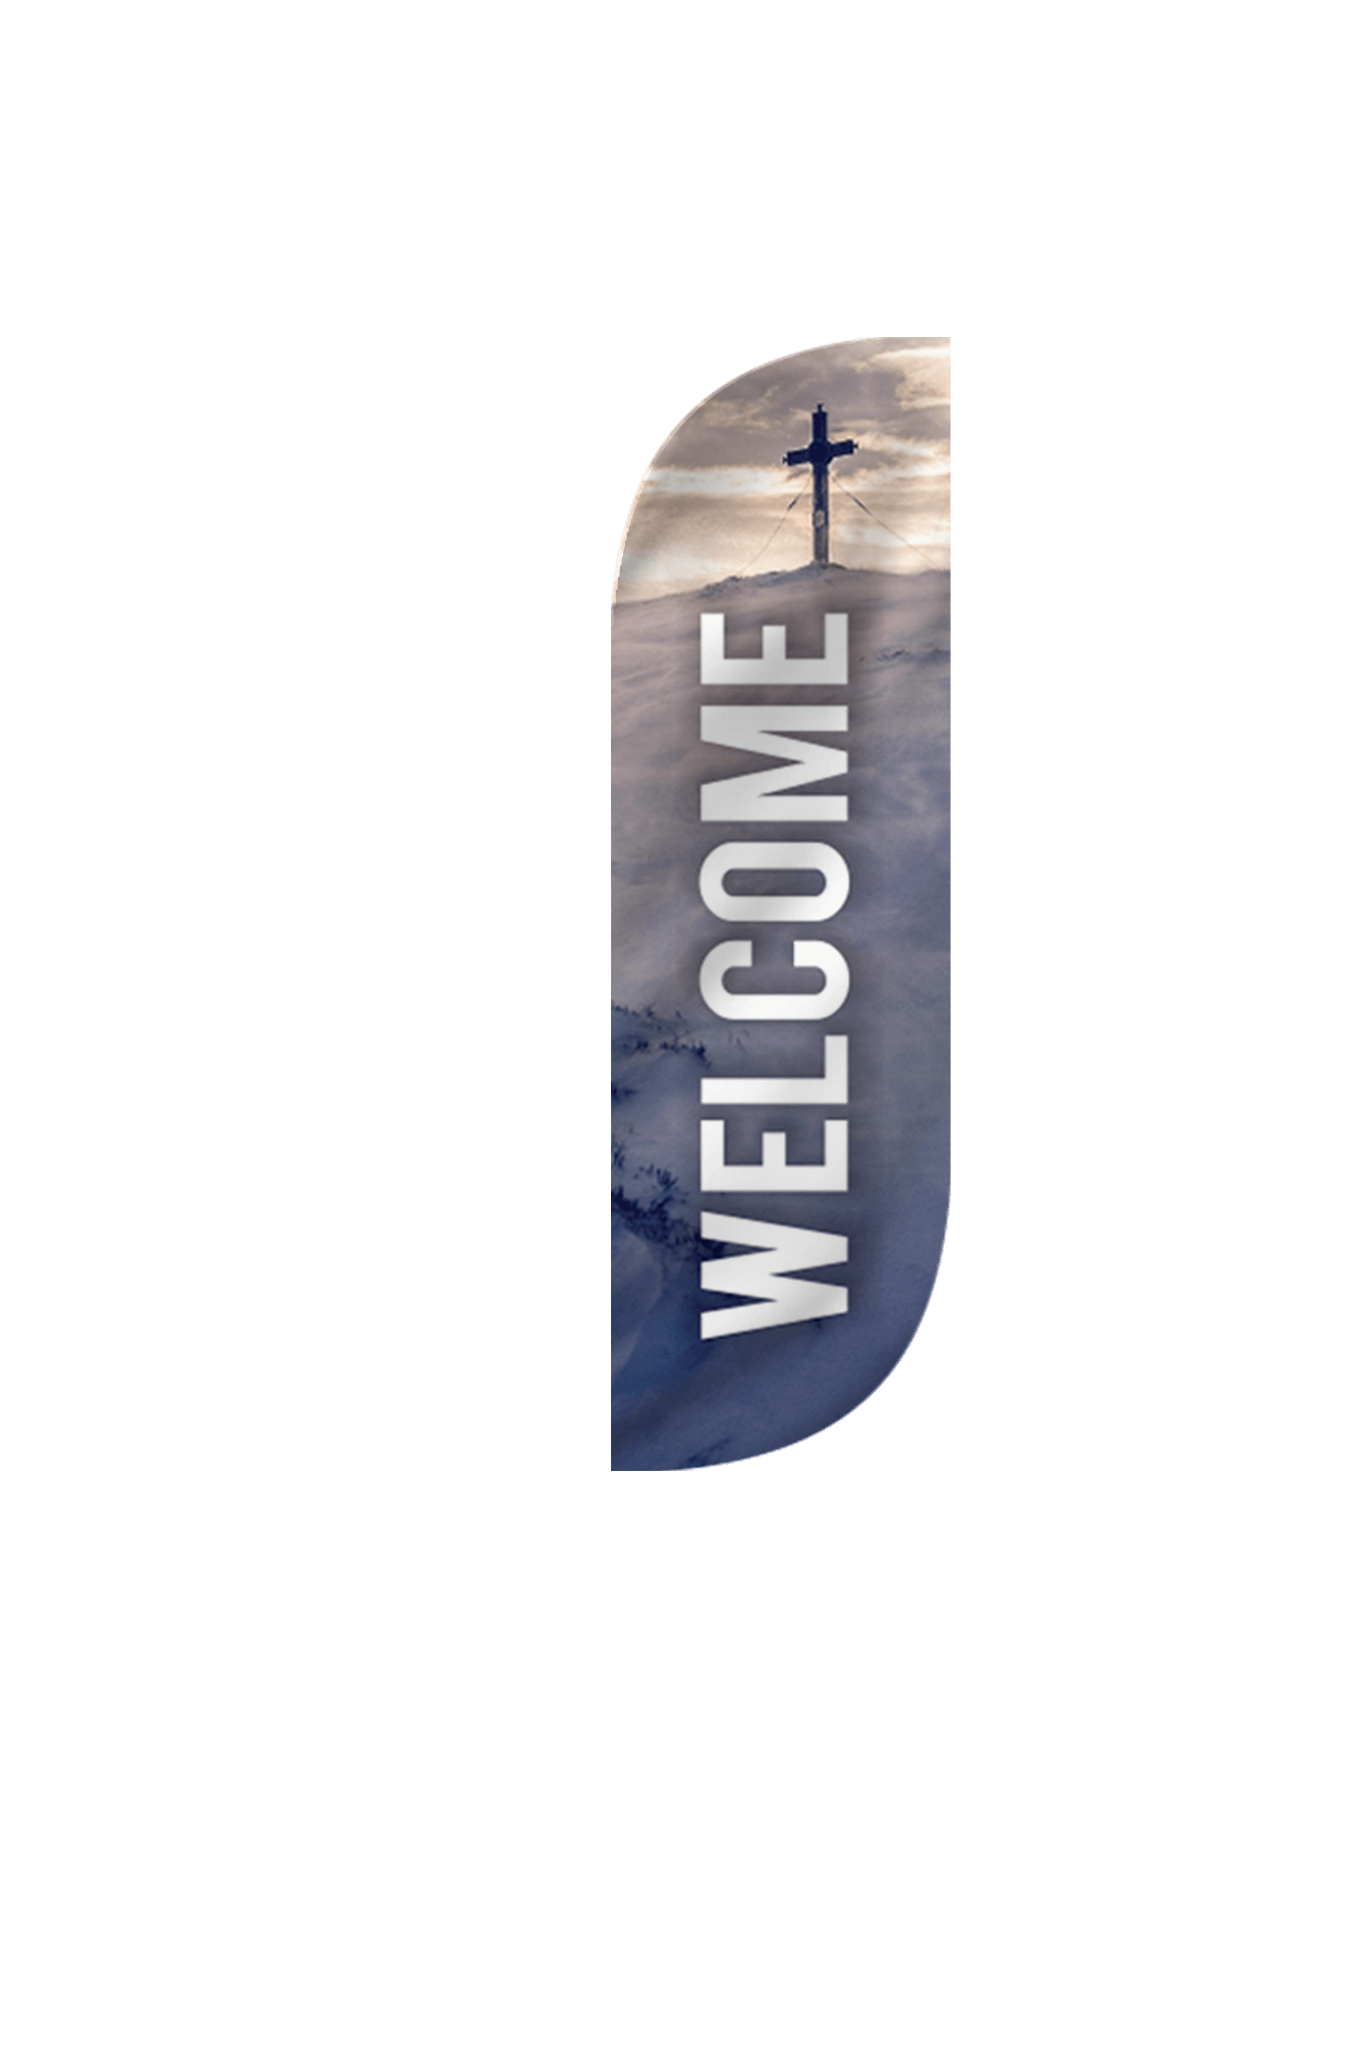 Welcome Church Feather Flag 